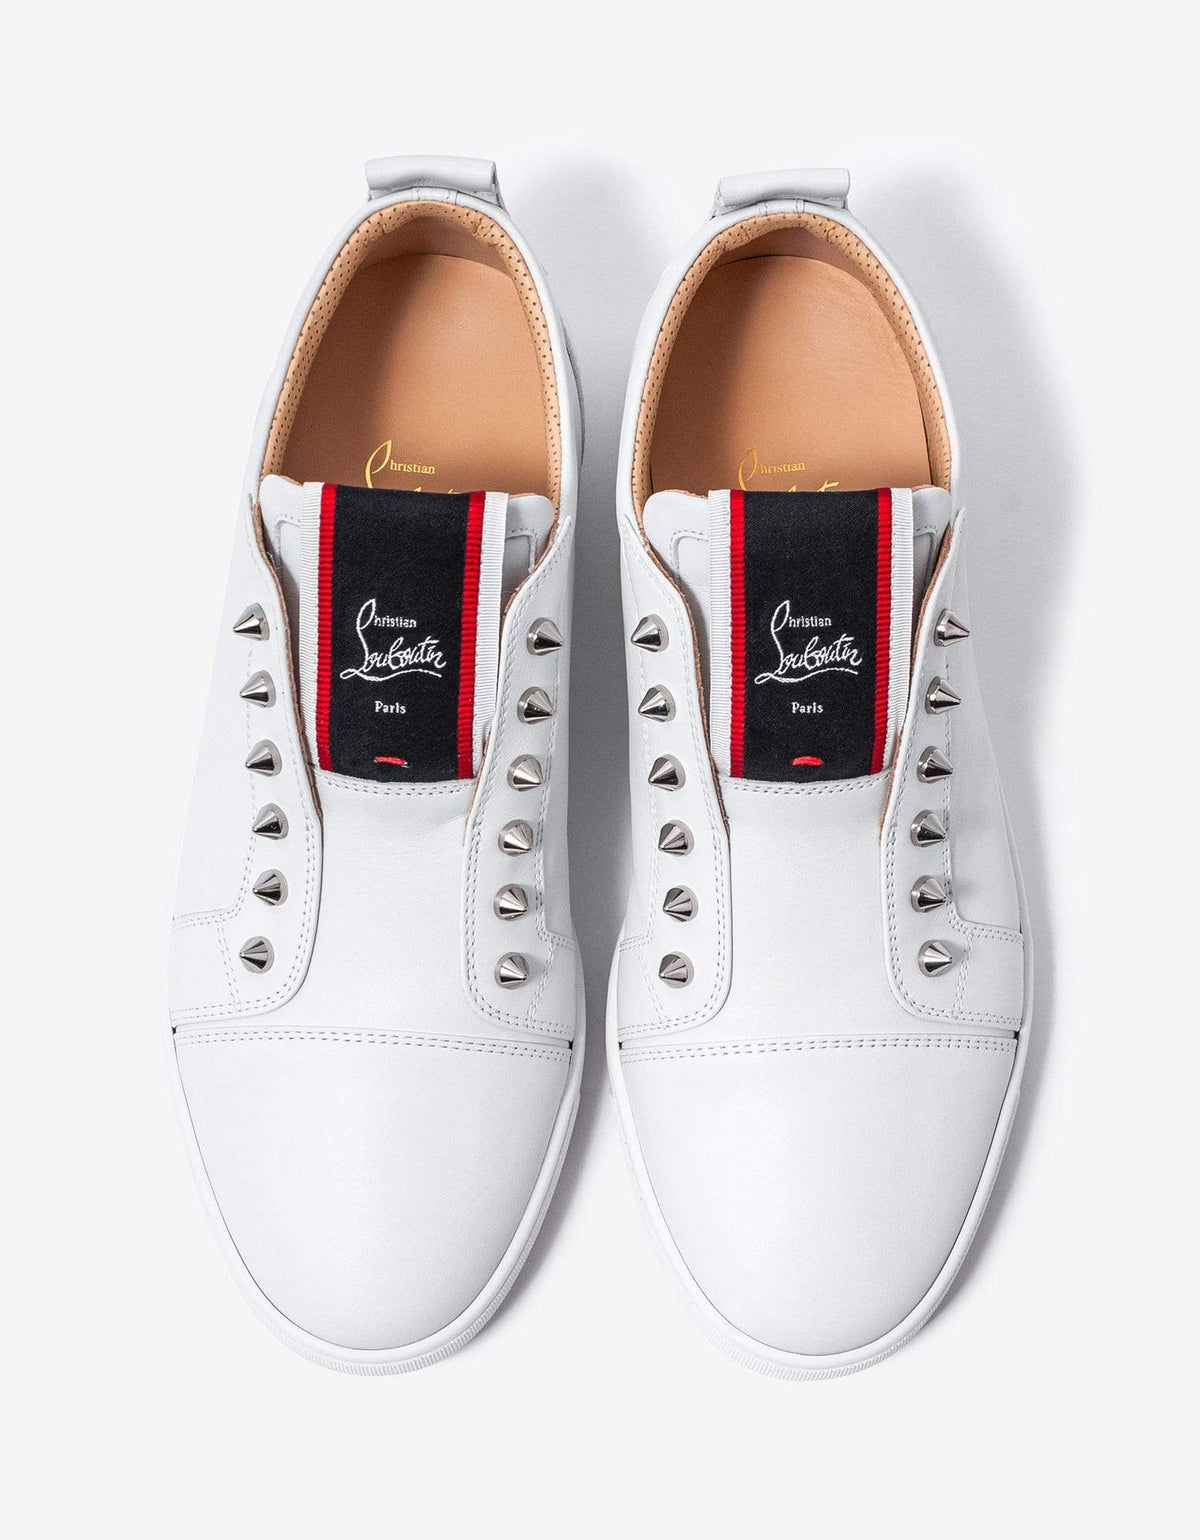 Christian Louboutin F.A.V Fique A Vontade White Leather Trainers